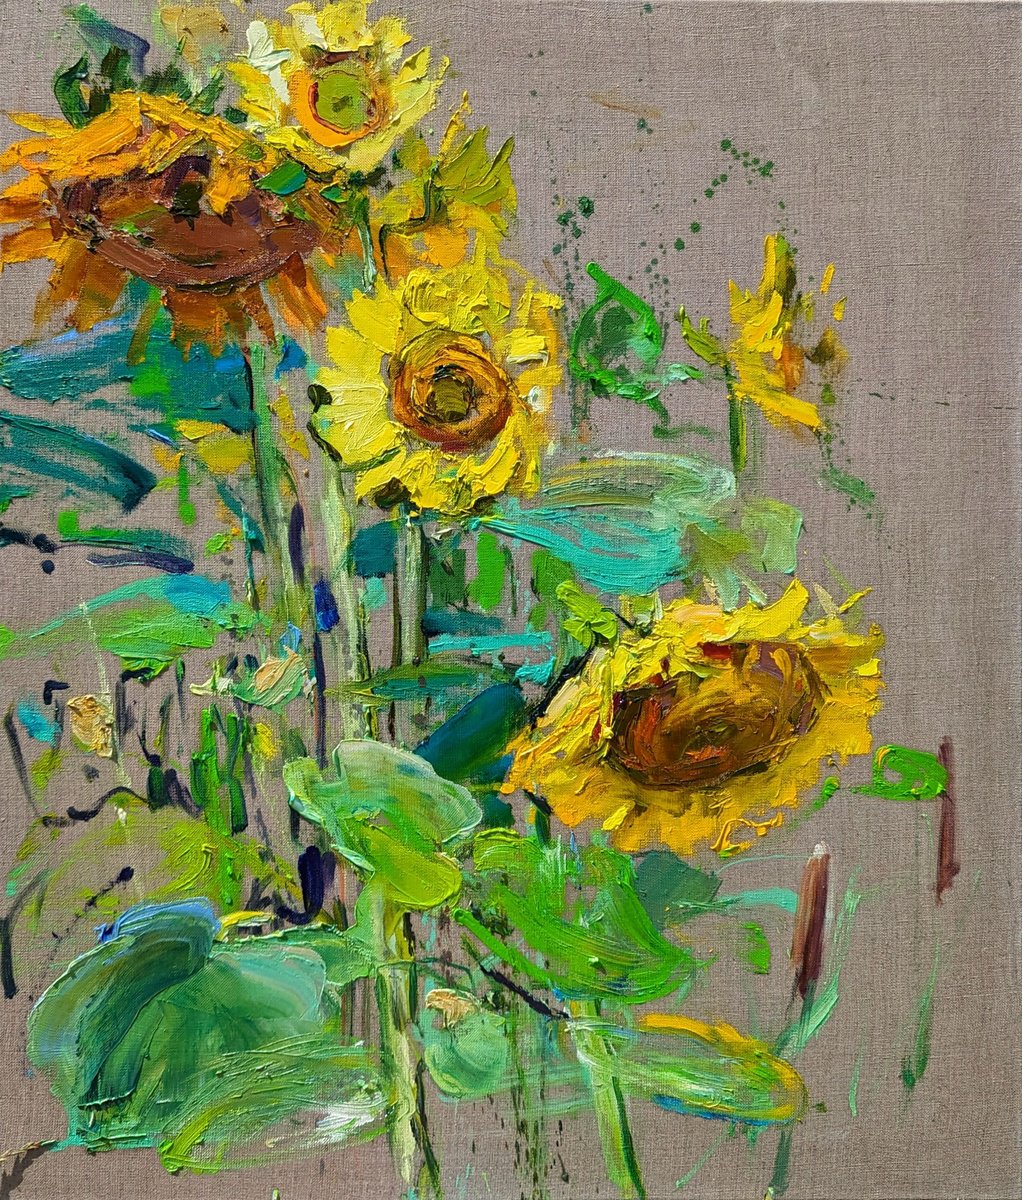 Sunflowers . 60x70 cm. Large Sunny painting a la prima on linen canvas by Helen Shukina